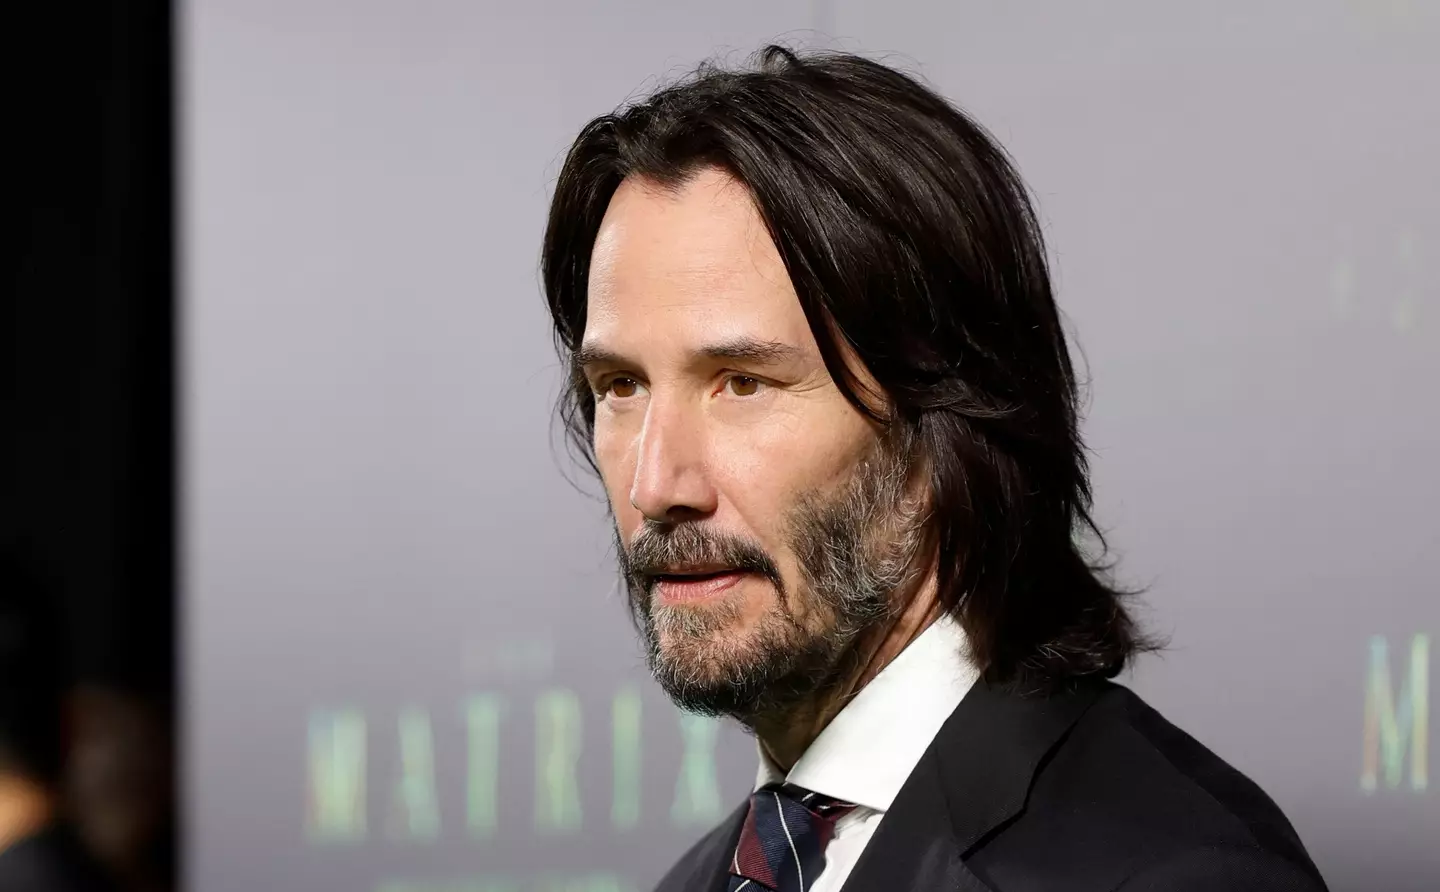 Keanu Reeves is known for being the 'nice guy' of Hollywood.